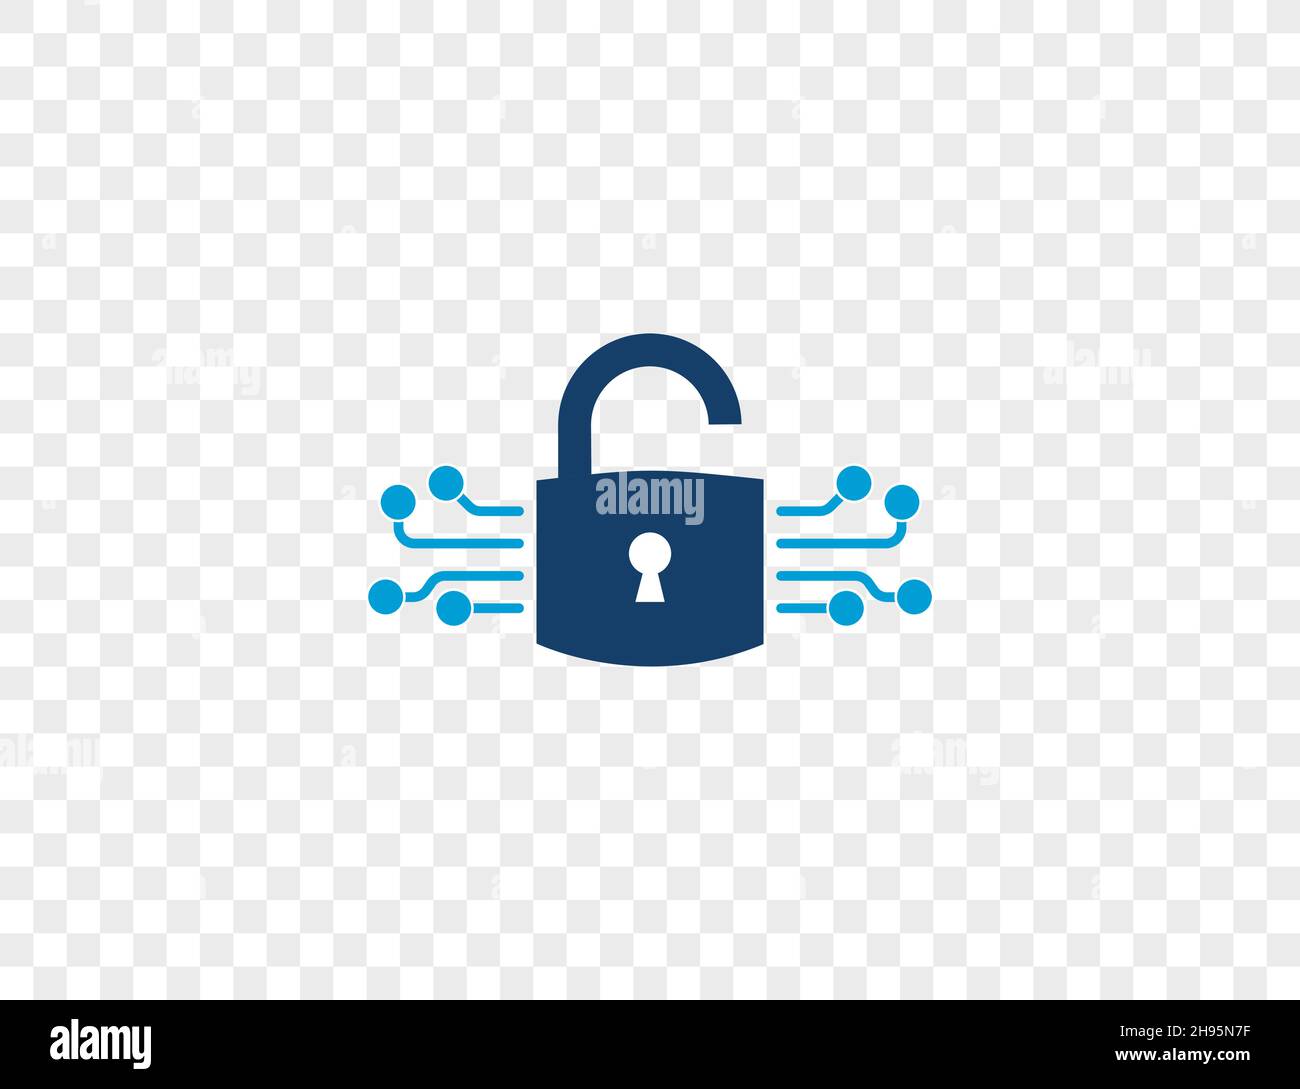 Vector illustration. Flat design. Cyber Security Icon Stock Vector